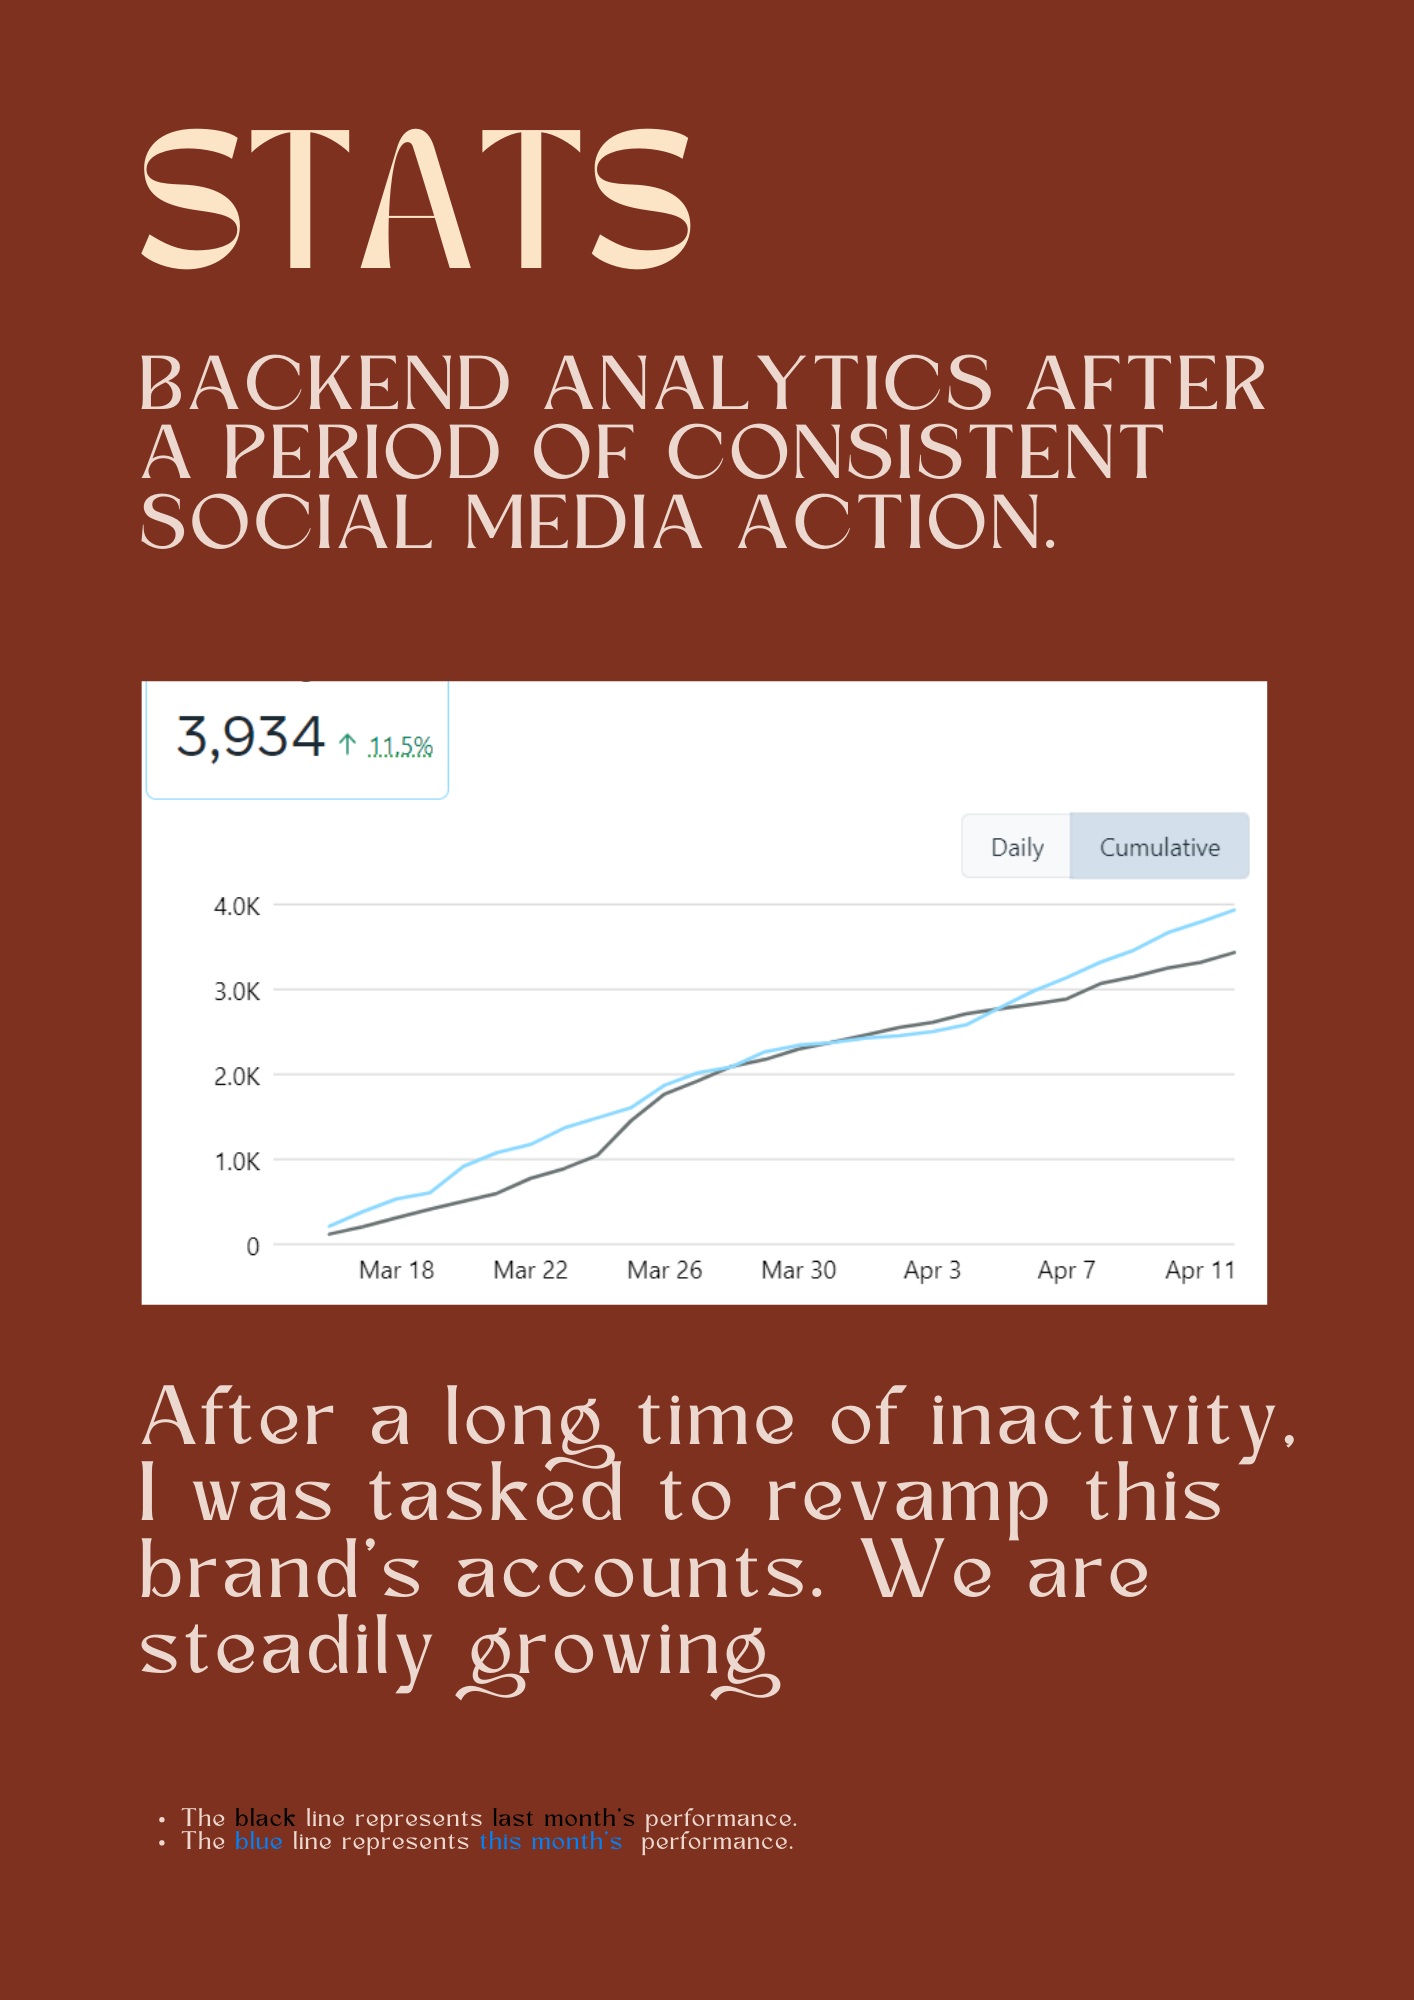 STATS

BACKEND ANALYTICS AFTER
A PERIOD OF CONSISTENT
SOCIAL MEDIA ACTION.

 

After a long time of inactivity,
| was tasked to revamp this
brand's accounts. We are

steadily growing,

CEN [ISIETSIRCE IE performance
CEN [TST IREE TE performance